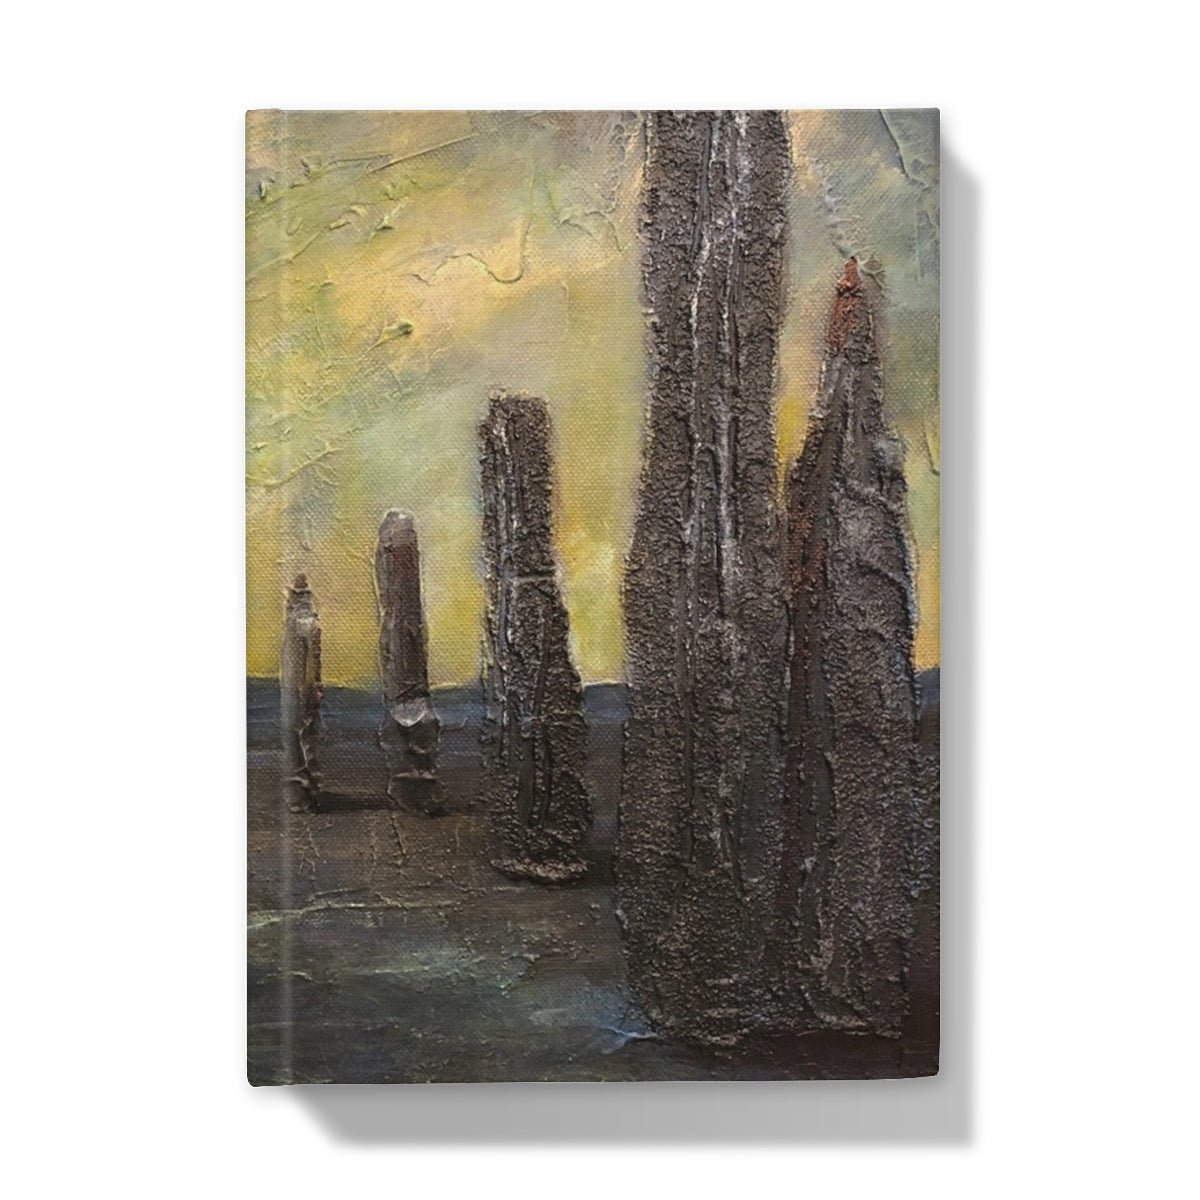 An Ethereal Ring Of Brodgar Art Gifts Hardback Journal-Journals & Notebooks-Orkney Art Gallery-5"x7"-Plain-Paintings, Prints, Homeware, Art Gifts From Scotland By Scottish Artist Kevin Hunter